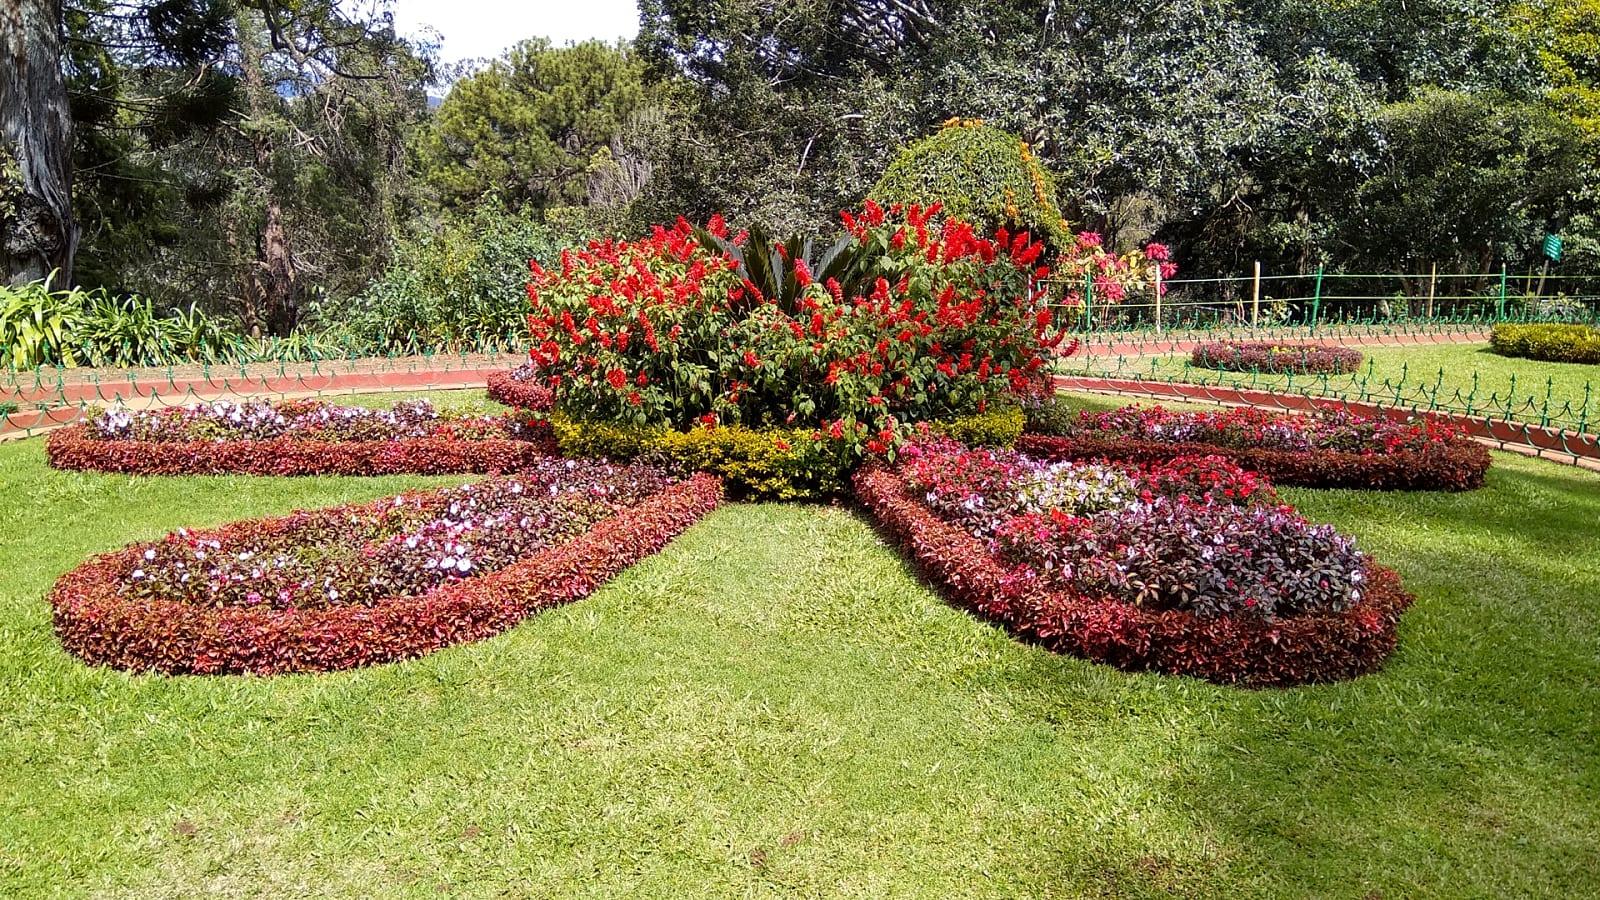 Ooty Botanical Garden Ooty, Entry Fees, Location, Facts